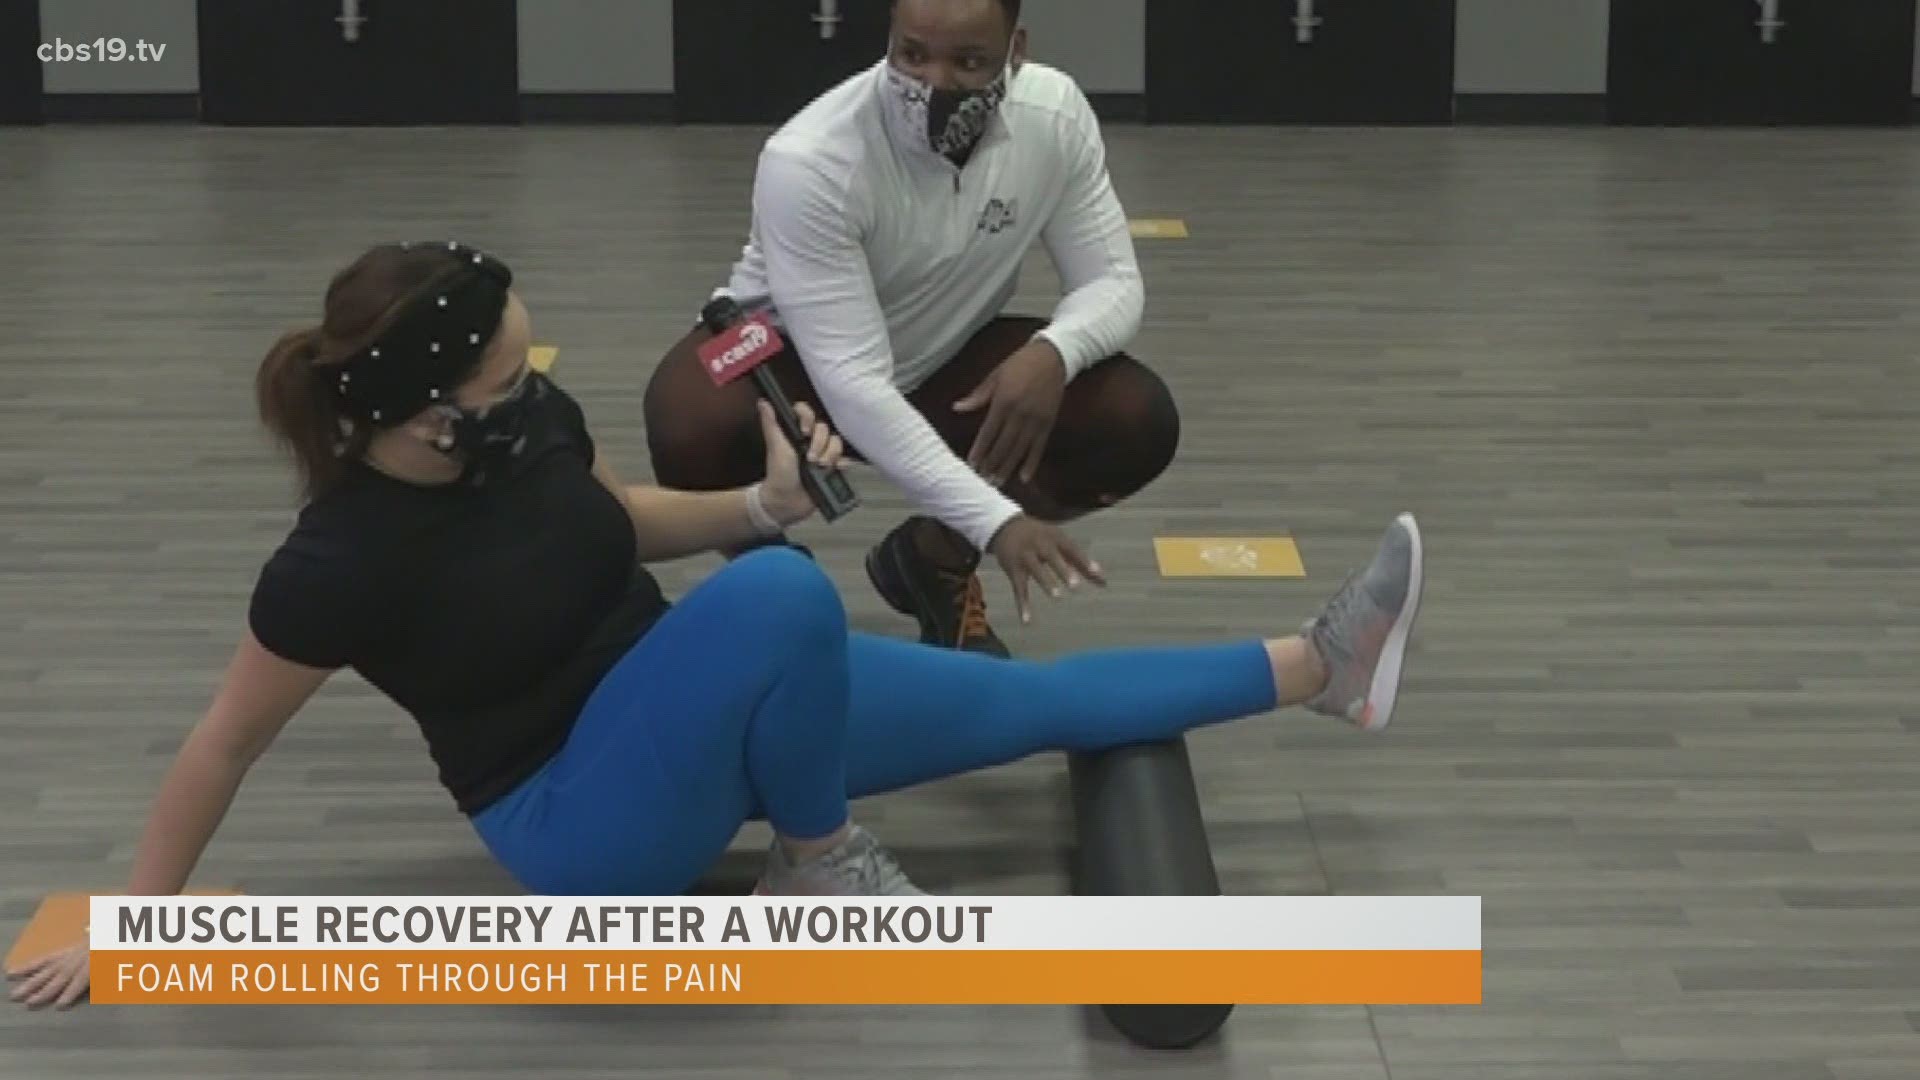 Muscle recovery after a workout, how foam rolling works